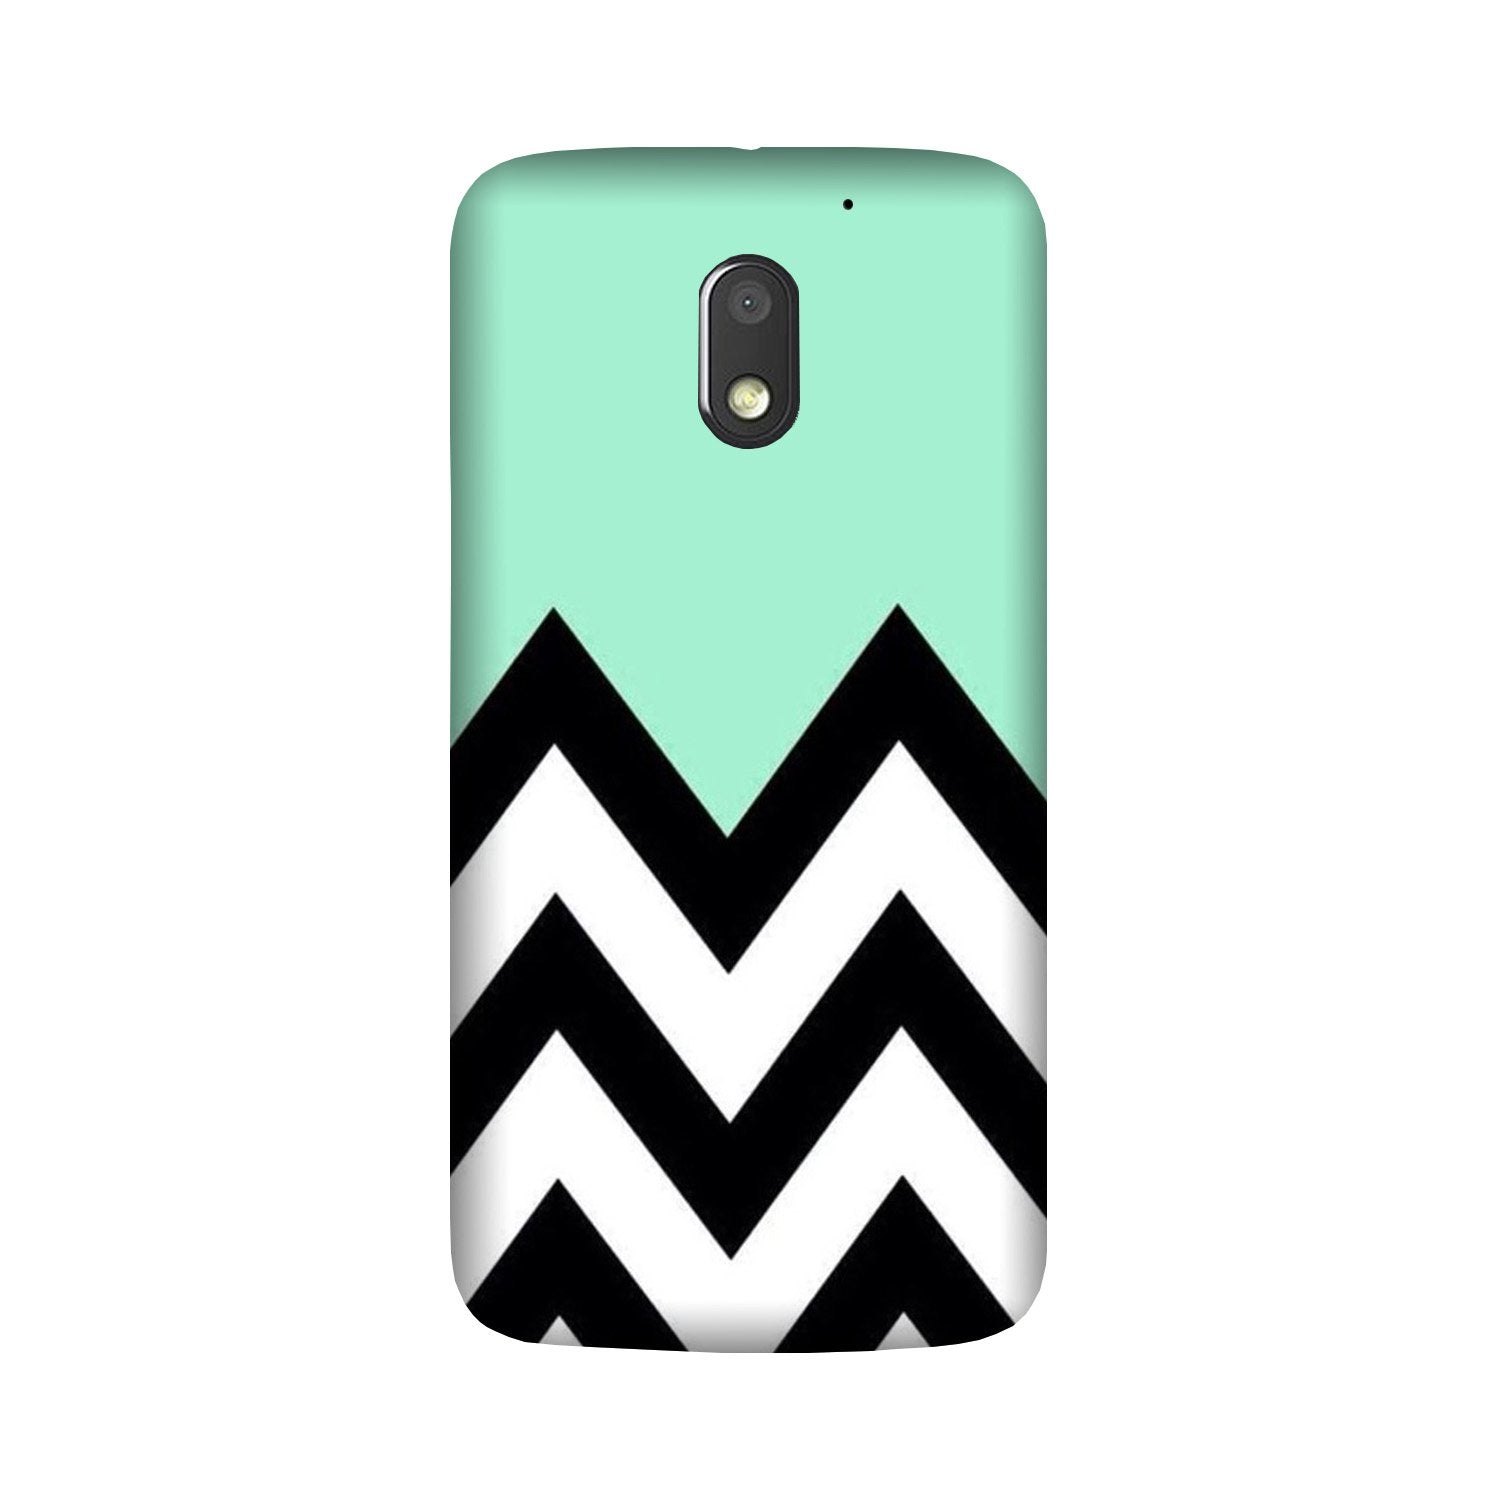 Pattern Case for Moto G4 Play